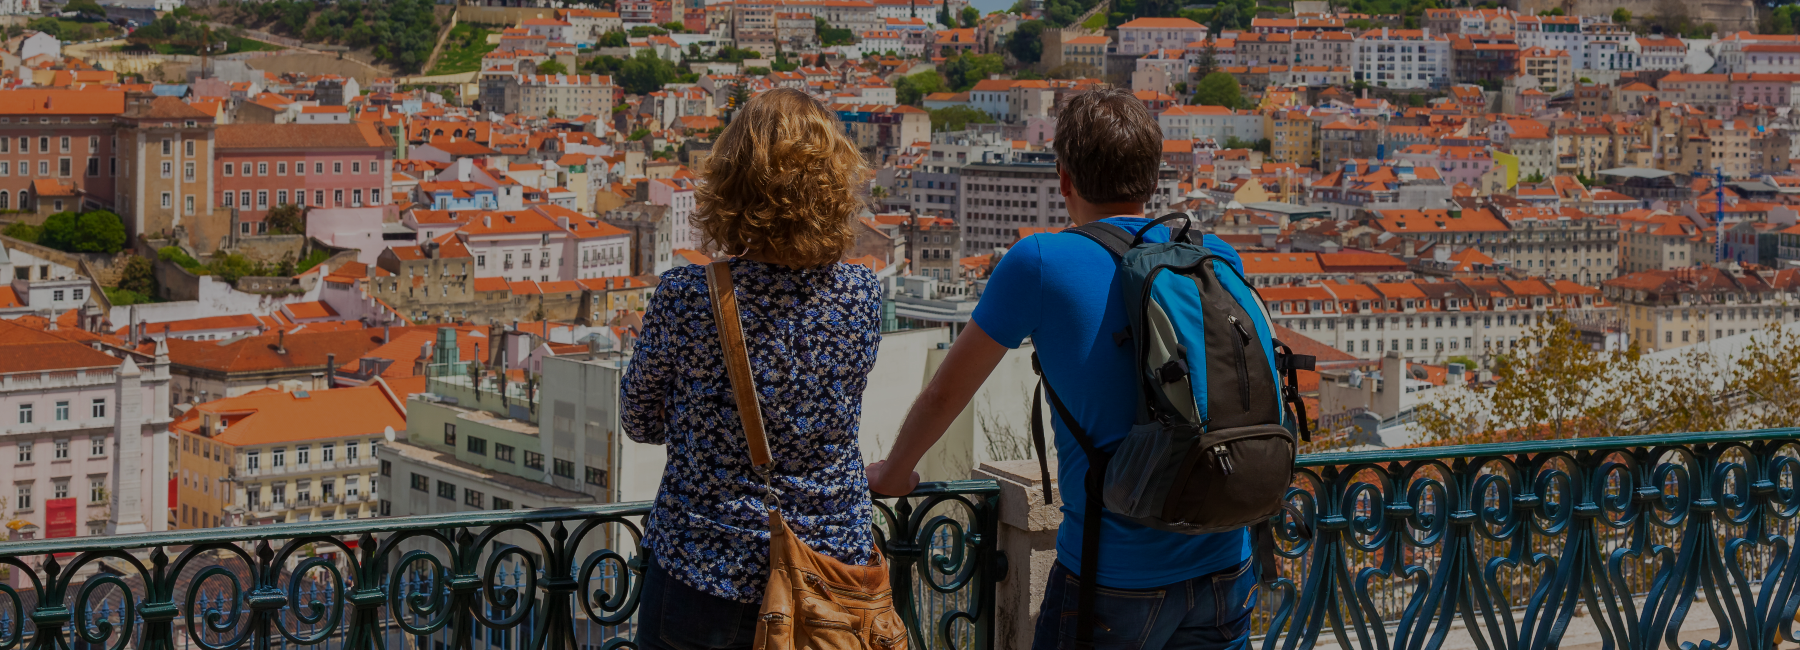 two tourists enjoying the incredible view of rooftop in lisbon